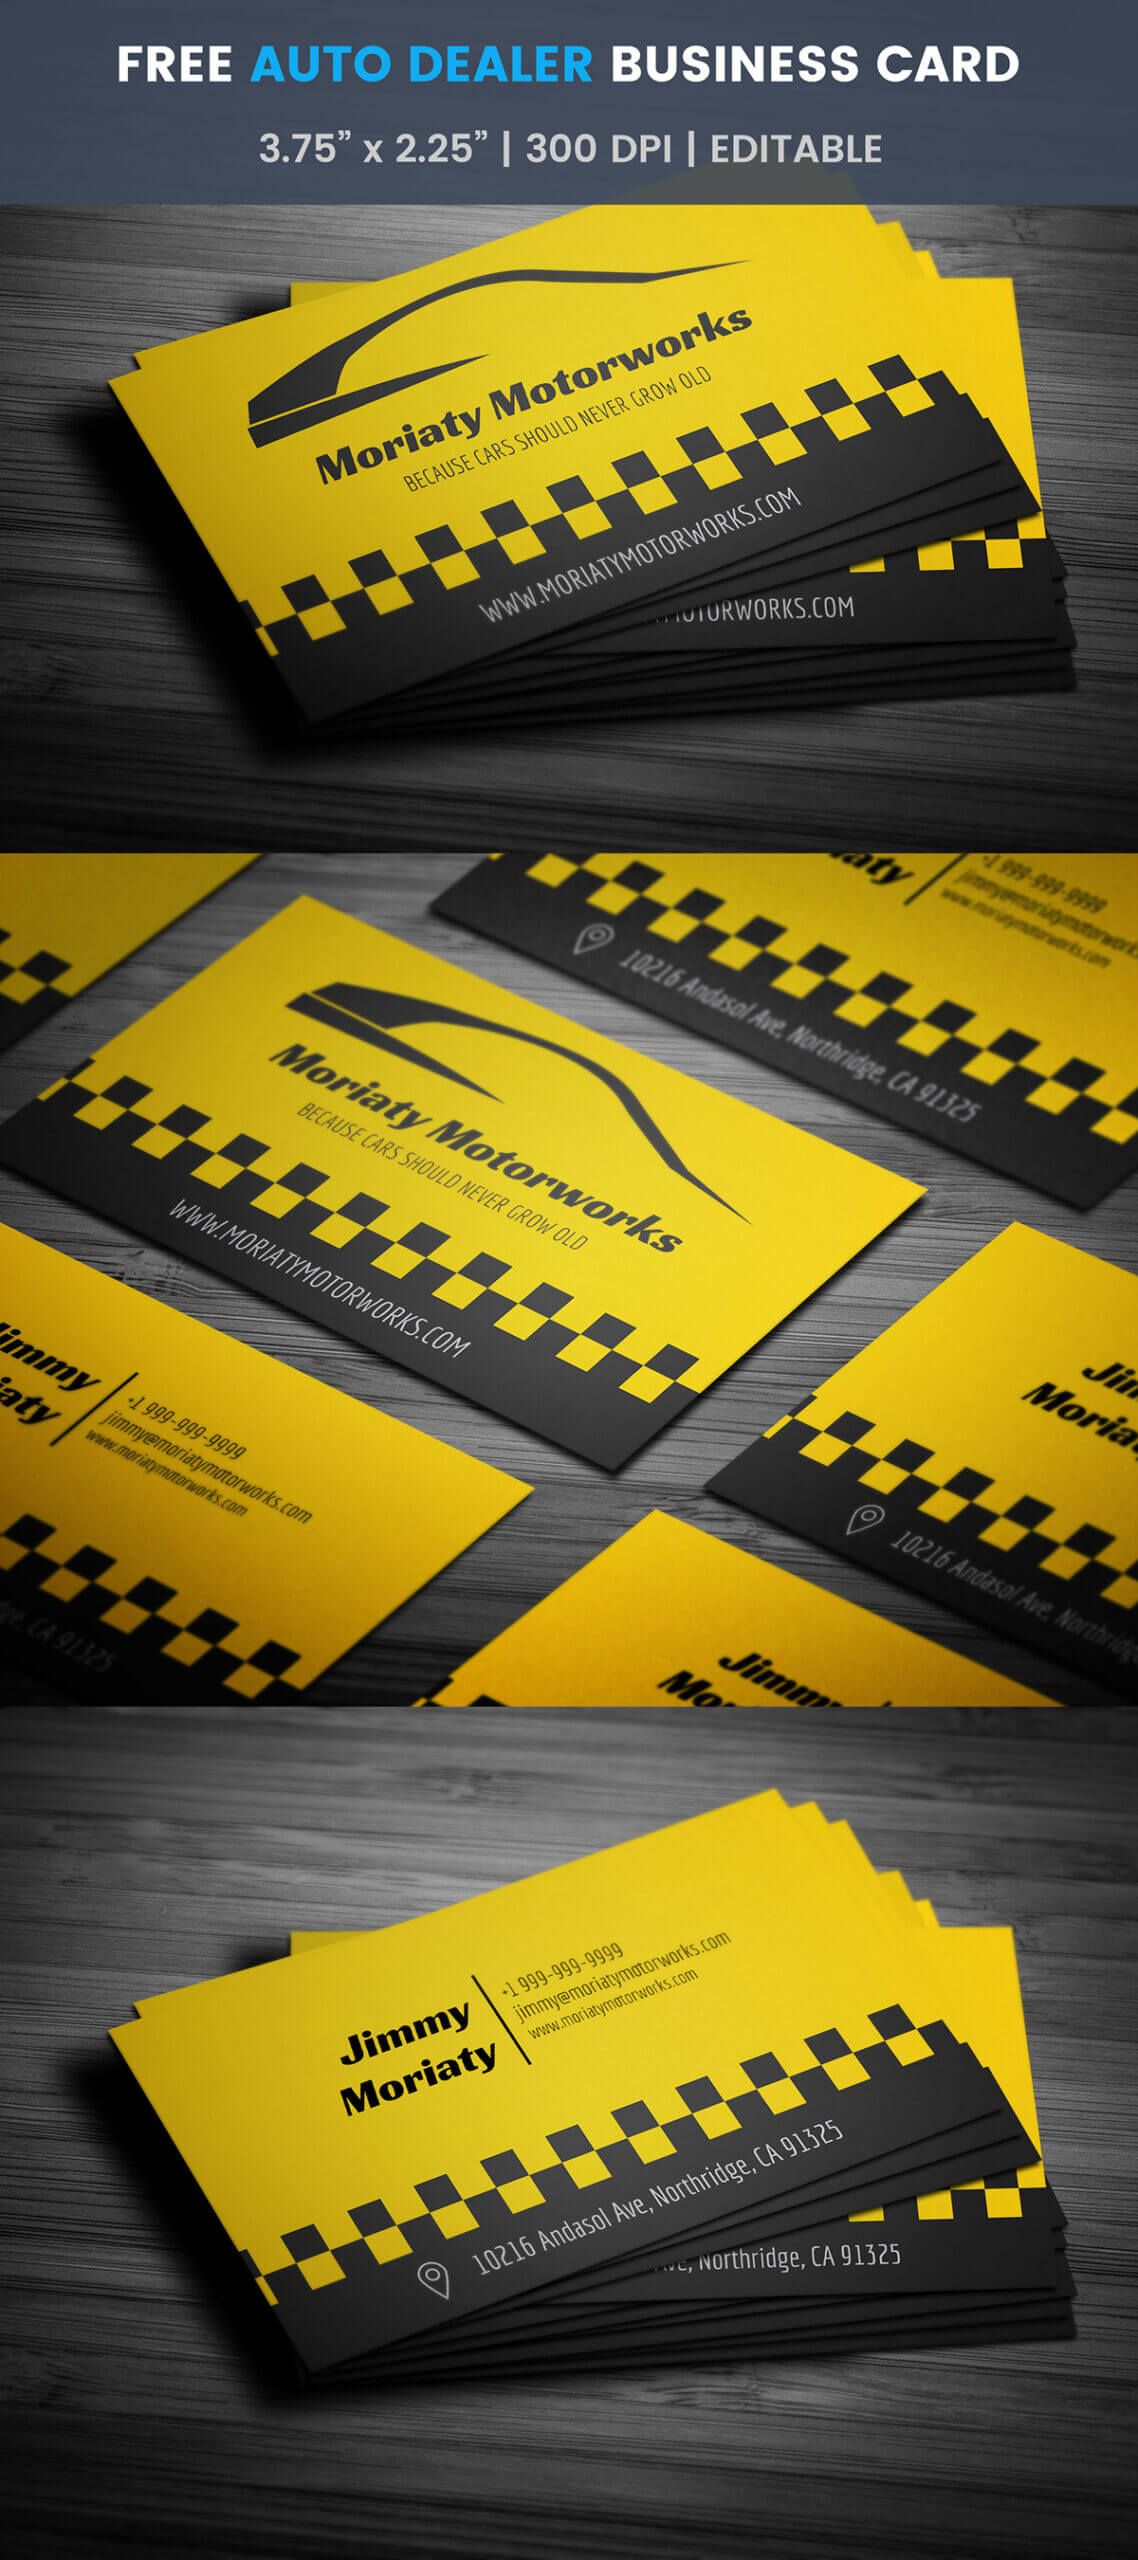 Free Automotive Business Card Template On Student Show Intended For Automotive Business Card Templates